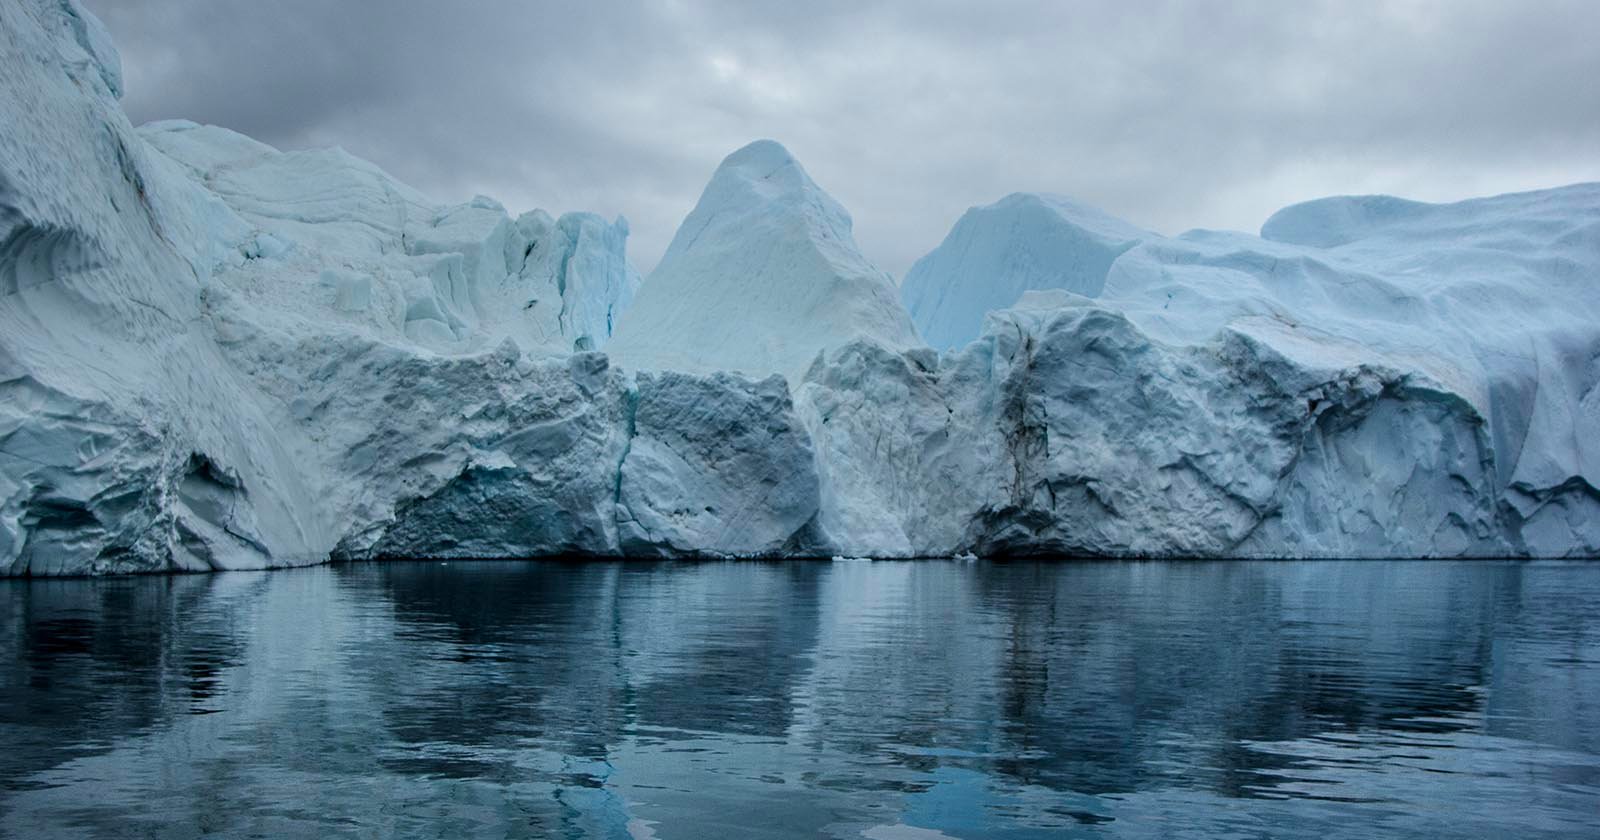 Photographic Series Explores Climate Change in Greenland and Antarctica - PetaPixel